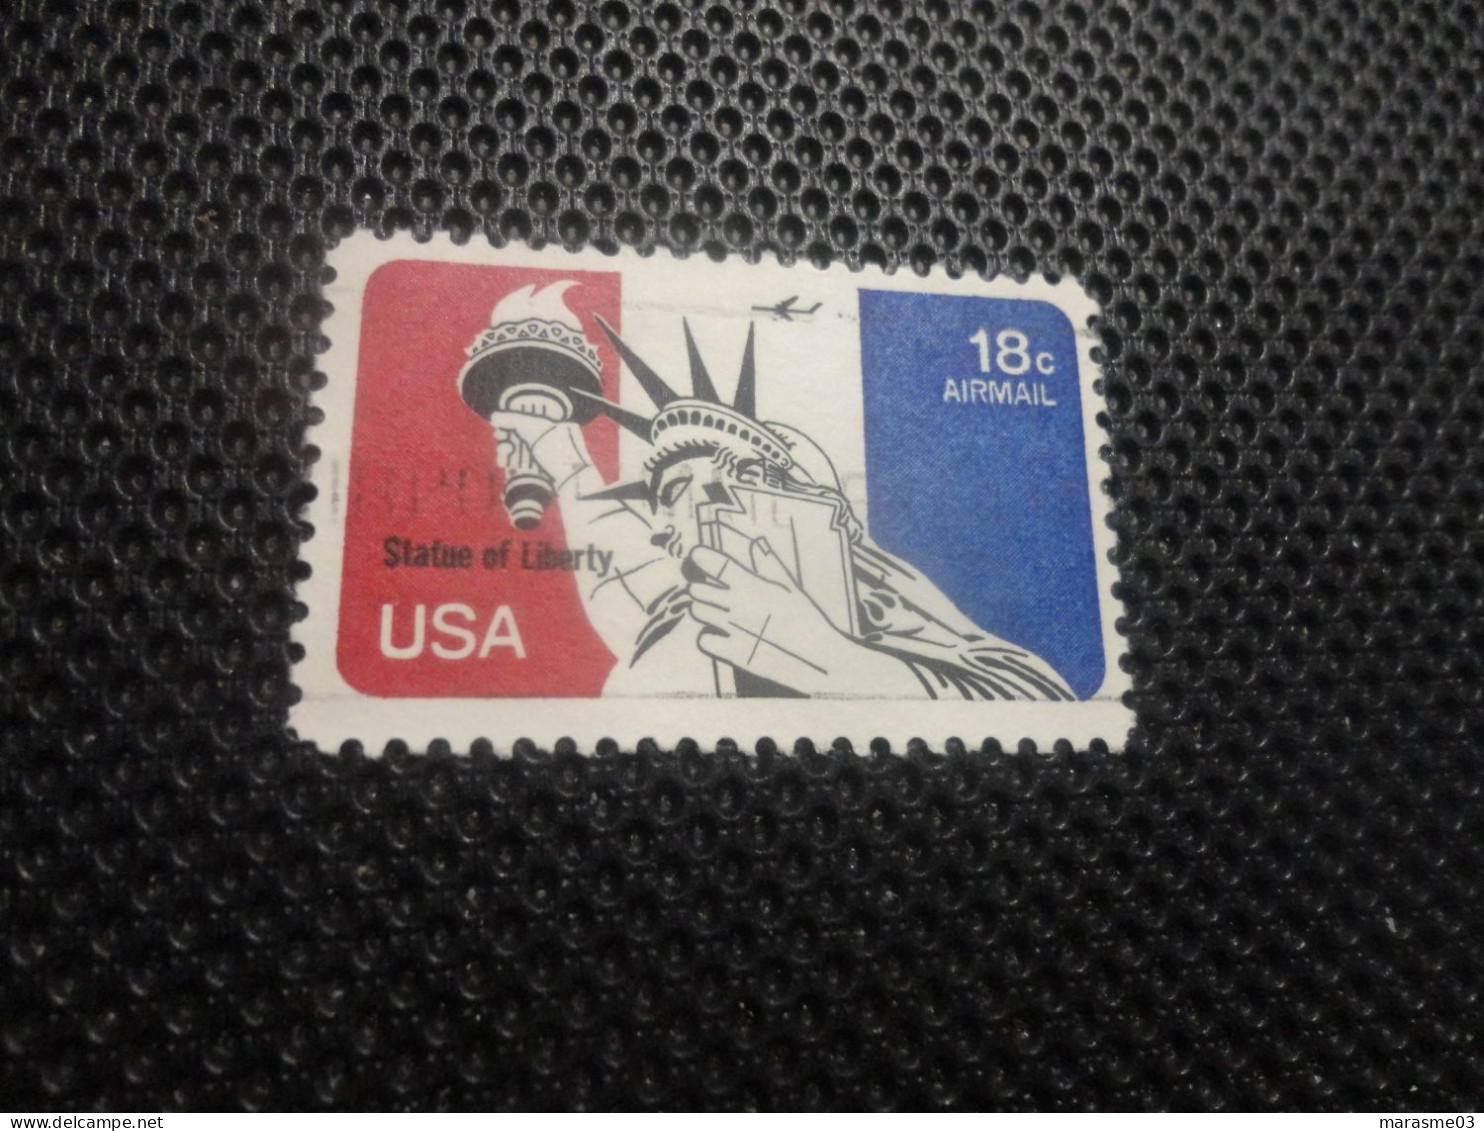 TIMBRE : U.S. Statue Of Liberty- MNH 18c 1974- Unused Mint Airmail Stamp - Usados